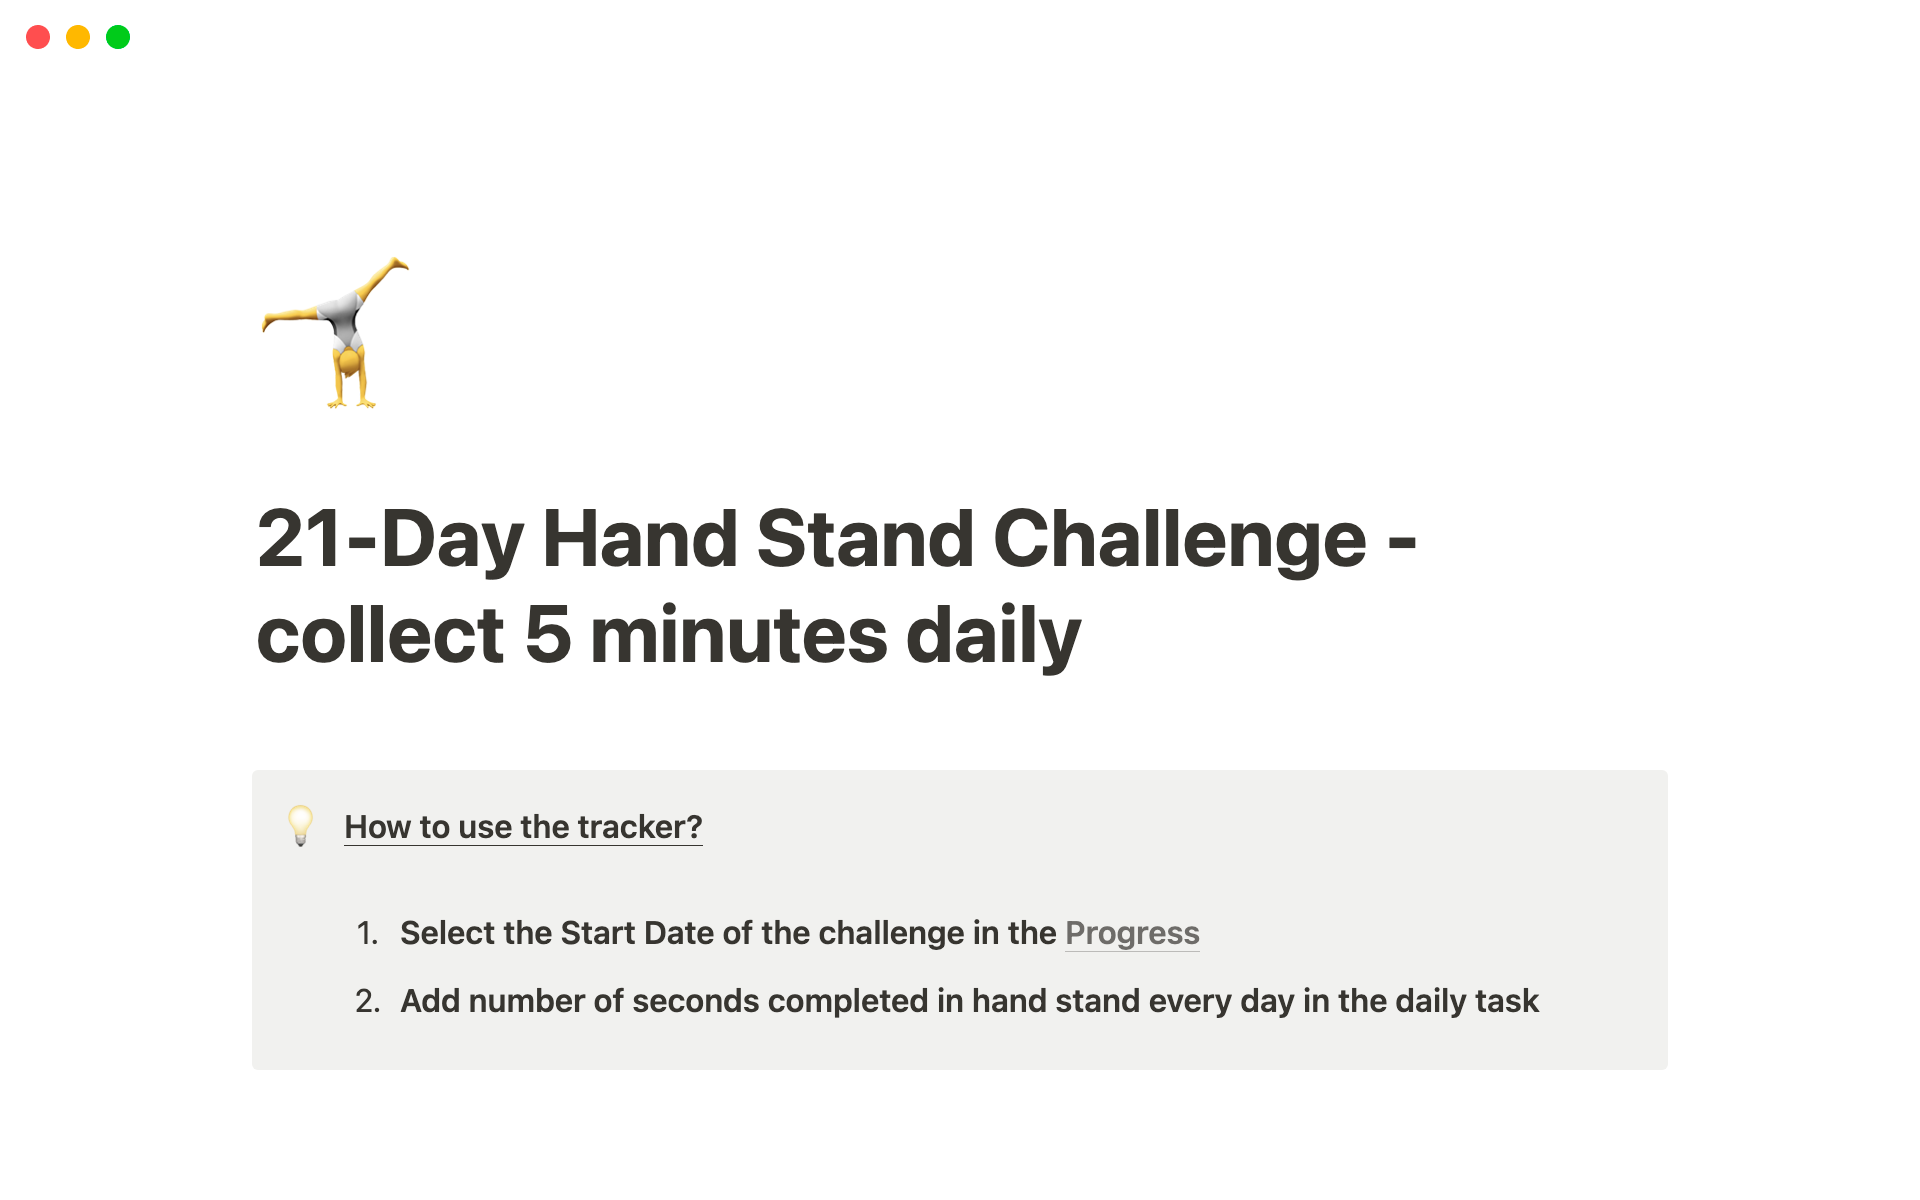 The template designed to track your progress in the 21-day handstand challenge, allowing you to input daily handstand seconds, while automatically updating the completion status of each day and the overall challenge.